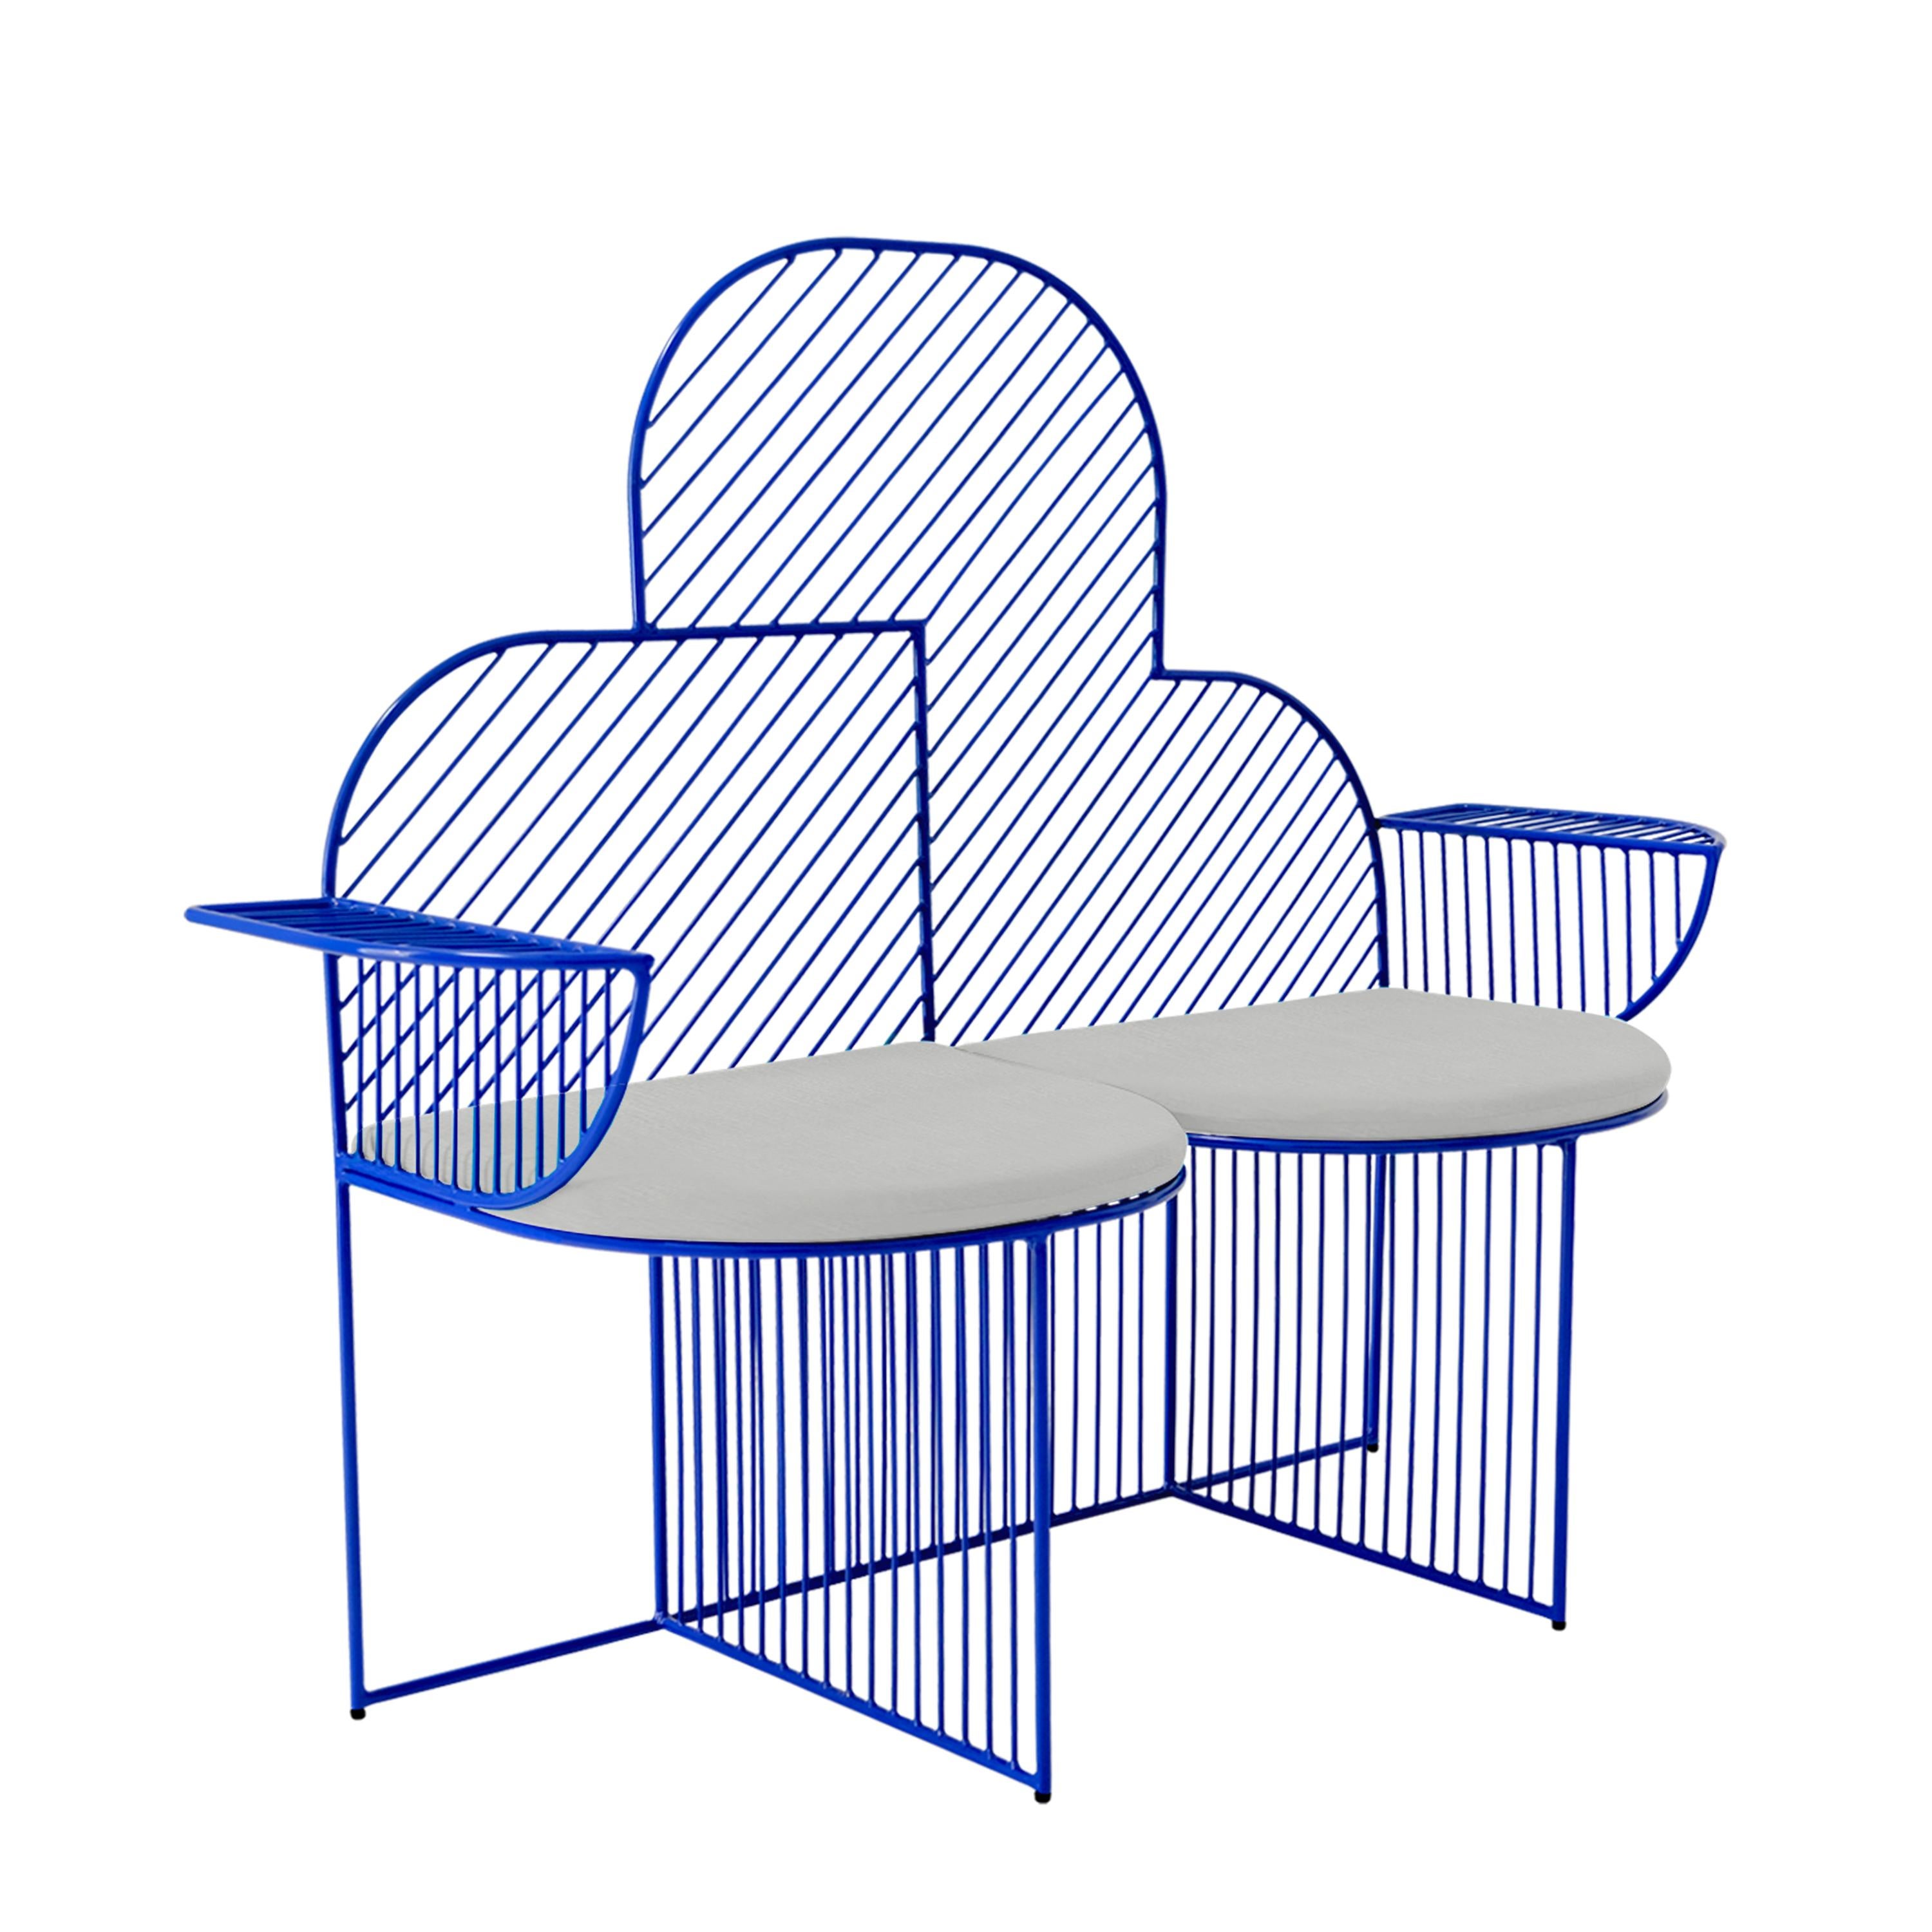 Made to inspire a smile and a photo-op, The Cloud bench is a bold, fun, and friendly wire lounge chair that sits two. With sunbrella padding and a cloud shape, this seat is perfect as outdoor garden furniture or a lounge chair for a porch or patio.